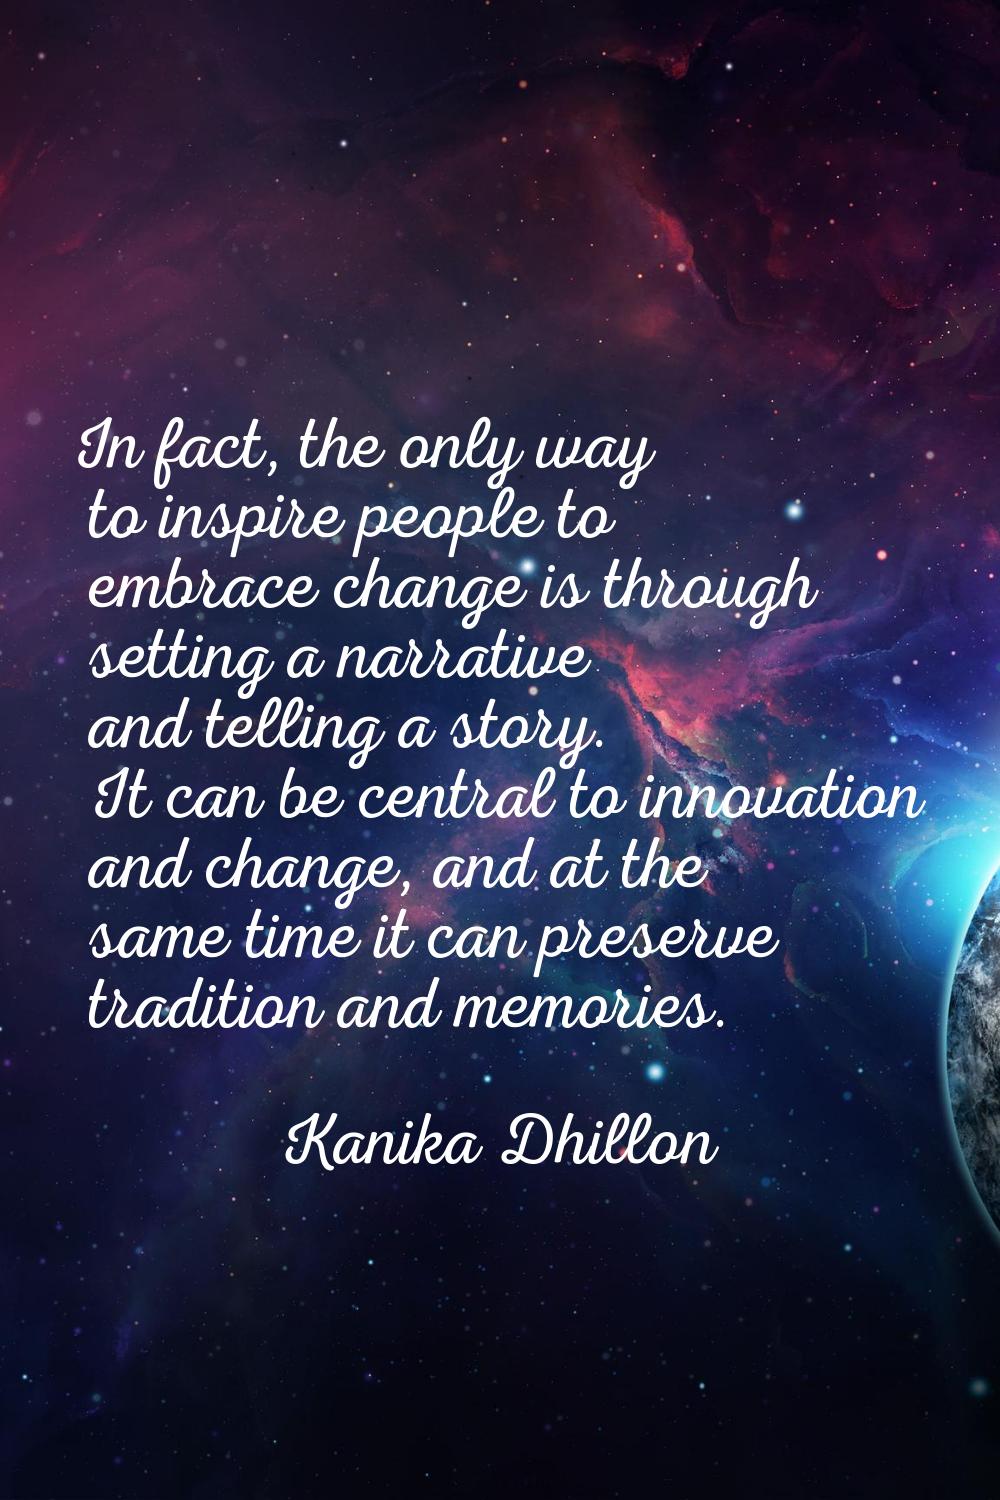 In fact, the only way to inspire people to embrace change is through setting a narrative and tellin